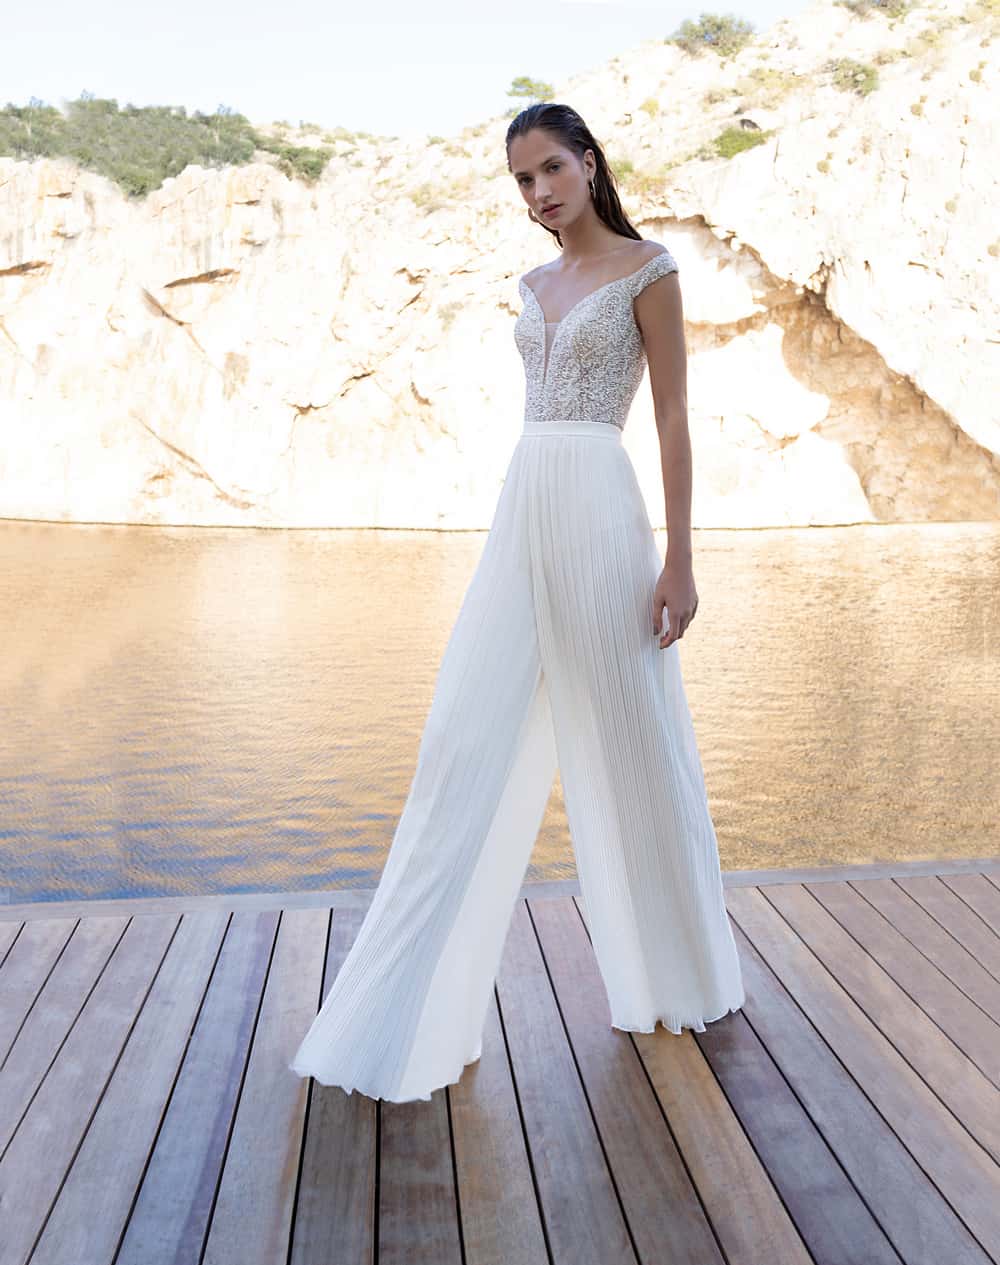 10 Wedding Dress Trends You Need to Know Right Now